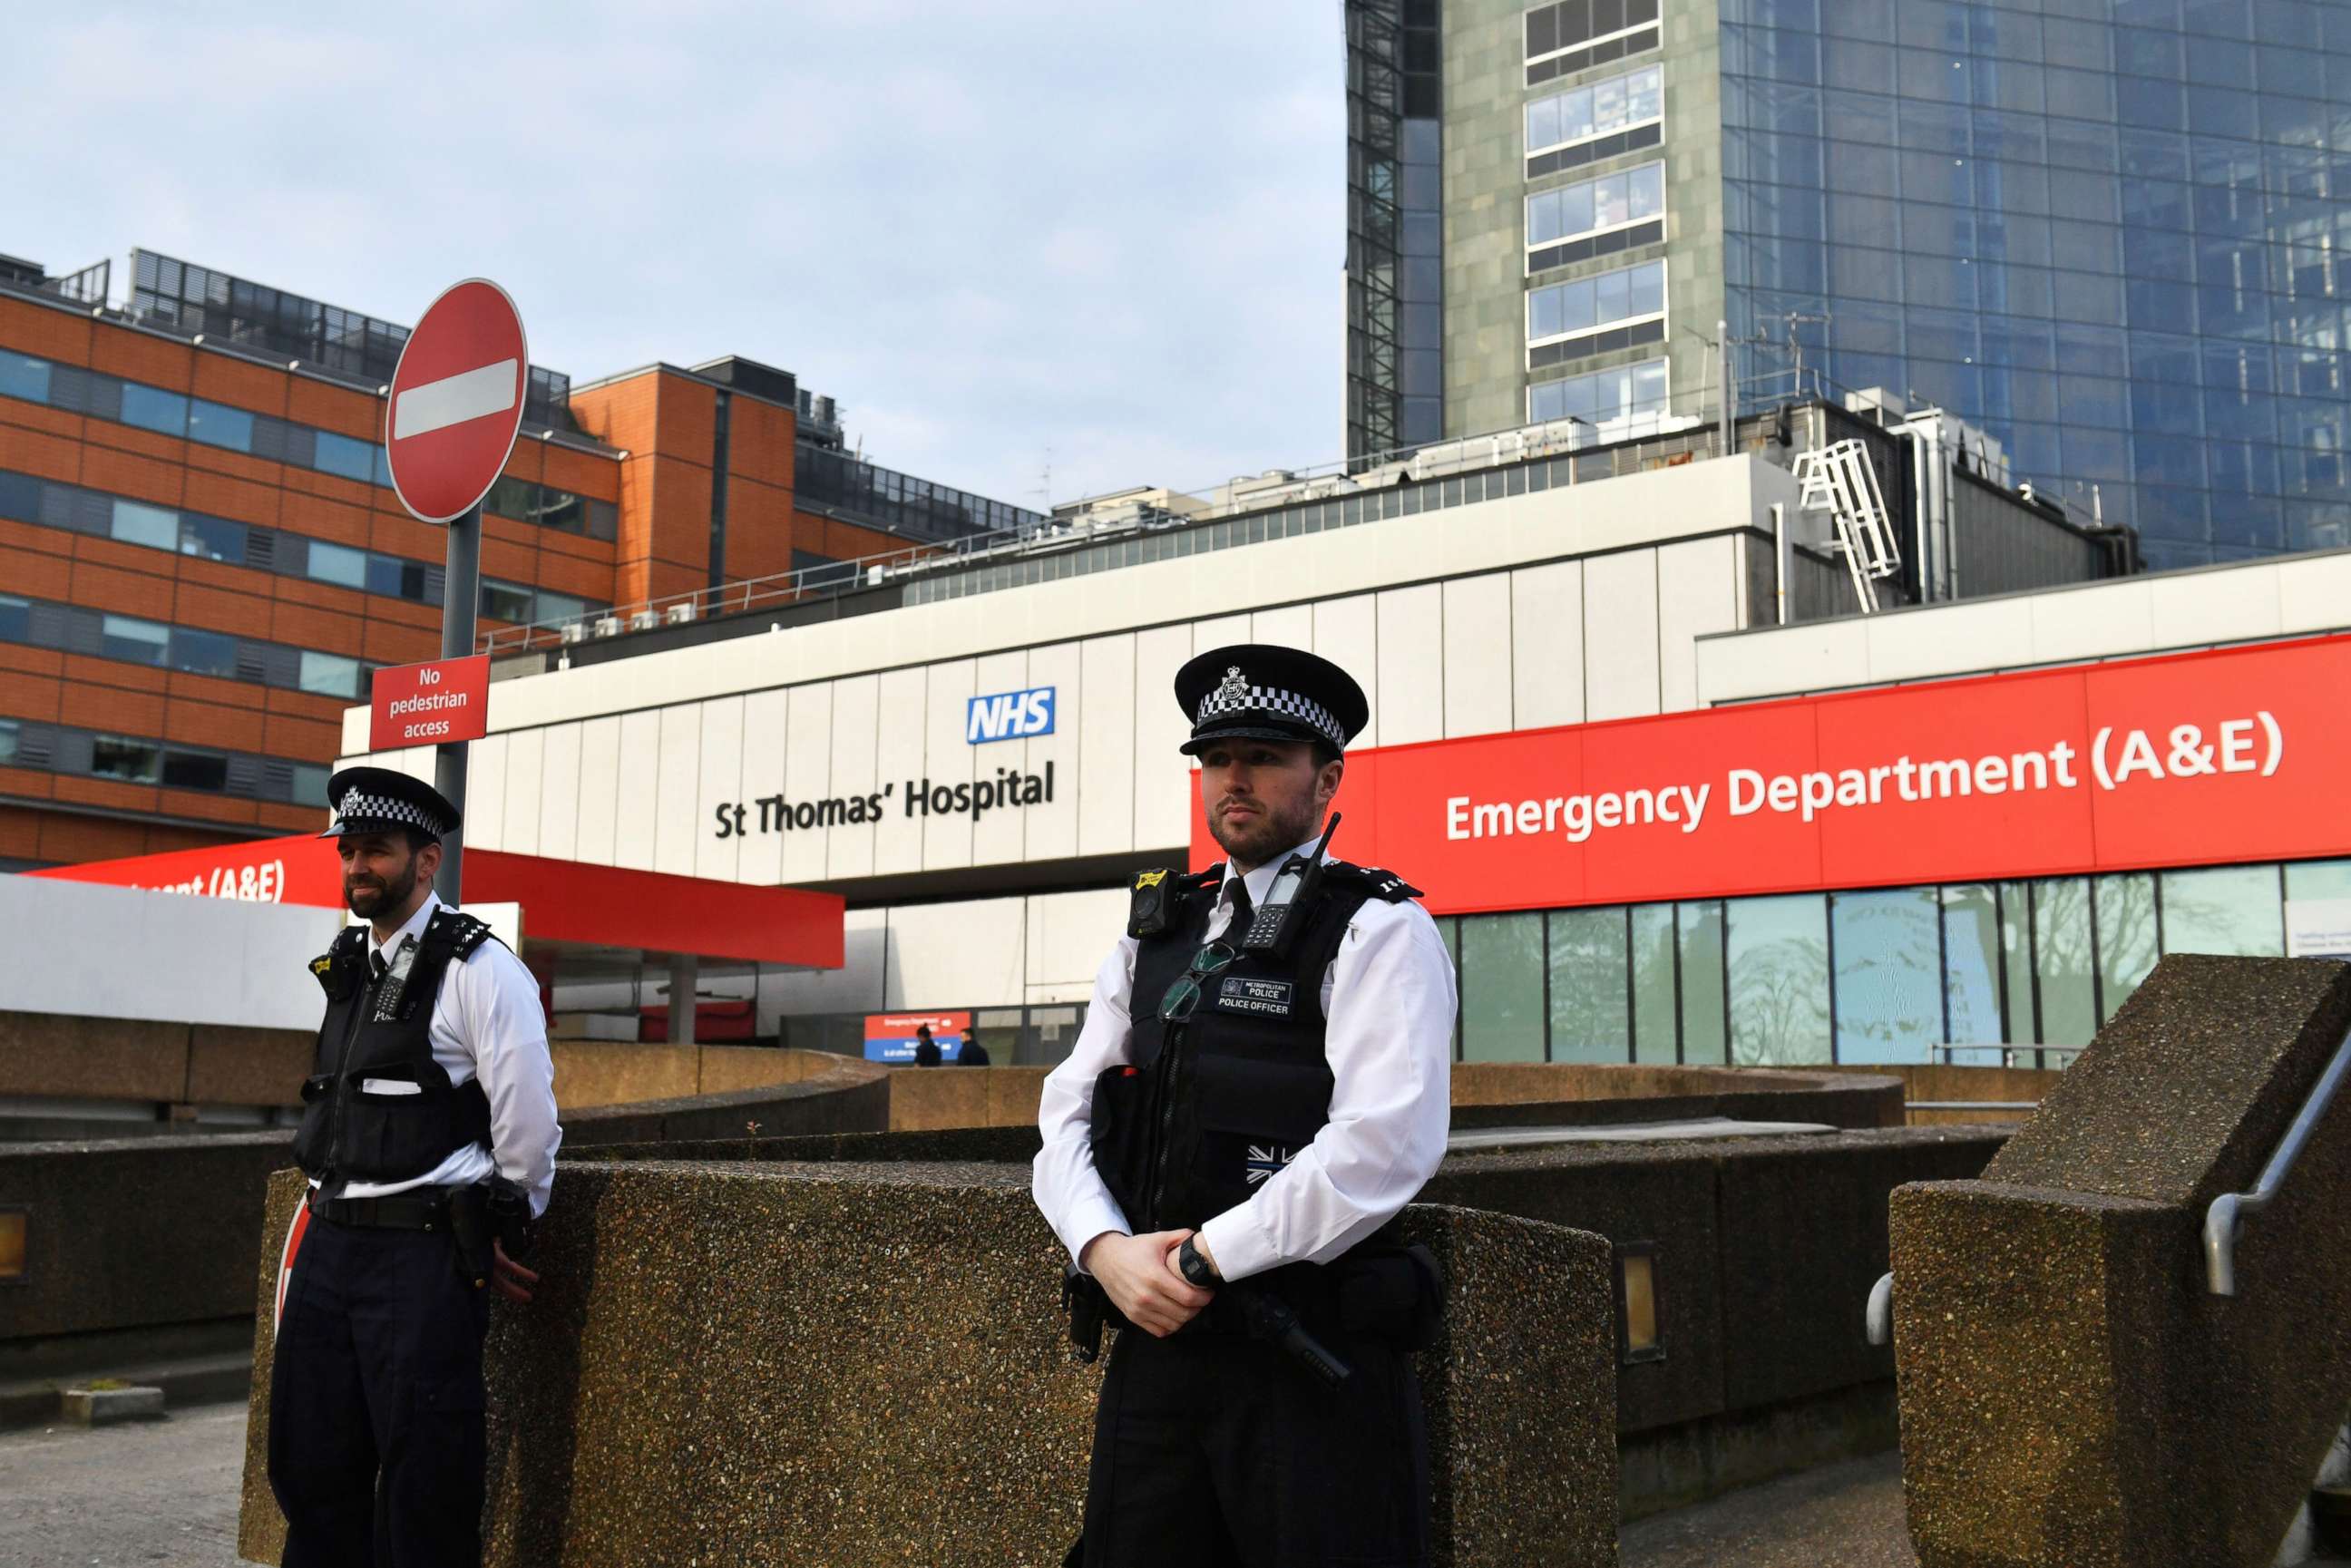 PHOTO: Police officers stand outside St Thomas' Hospital in the background in central London, where Prime Minister Boris Johnson remains in intensive care as his coronavirus symptoms persist, April 8, 2020.